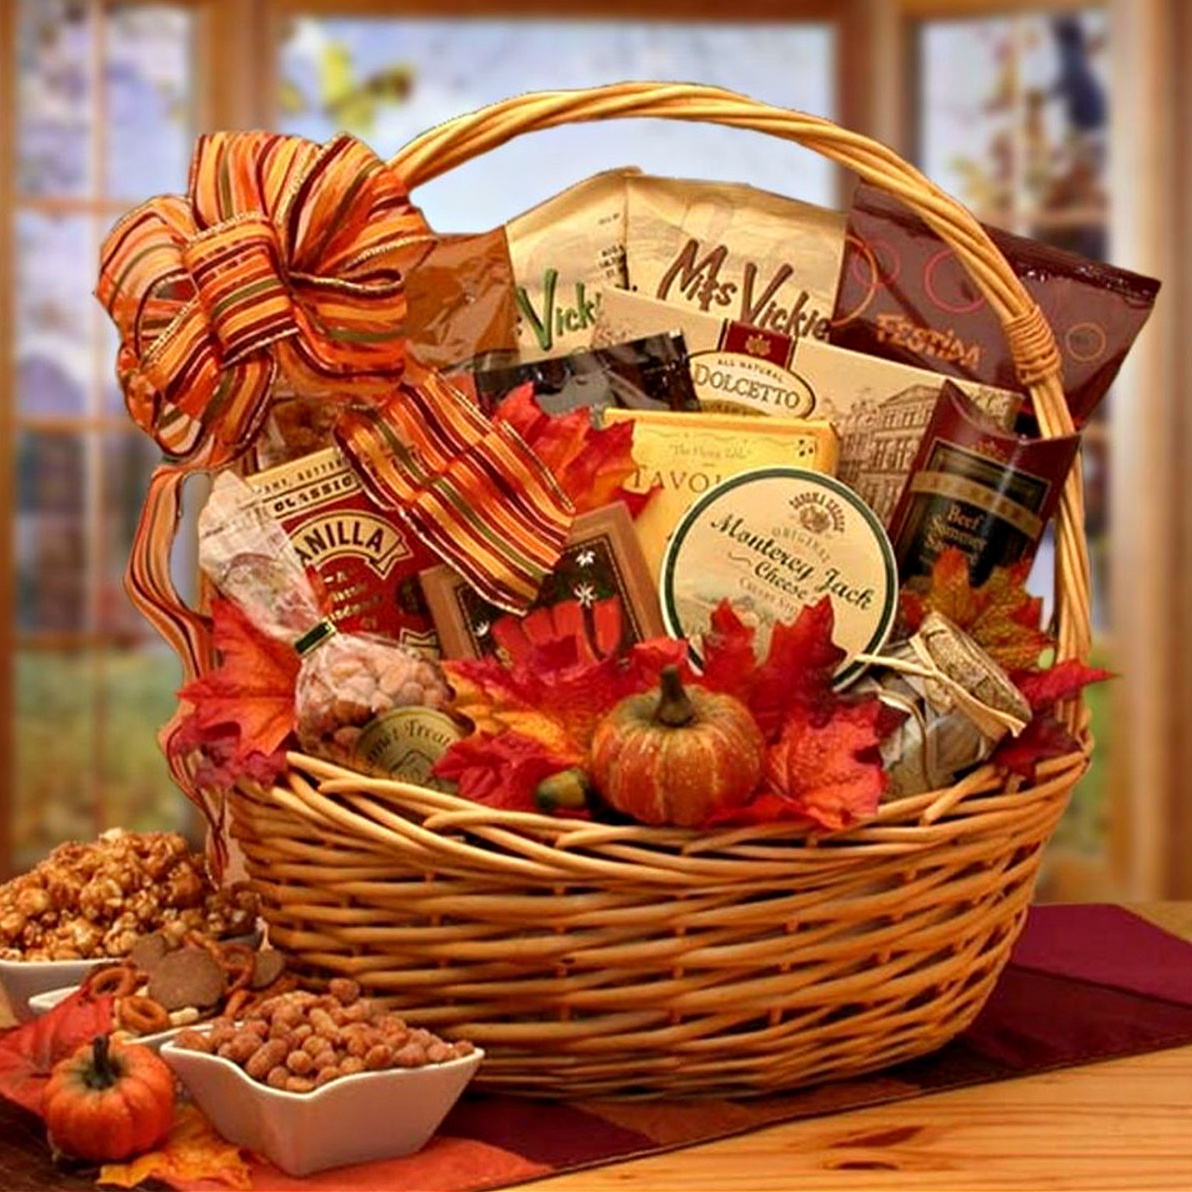 Random Acts of Kindness Christmas Basket - Delivery Driver Snack Sign -  Natural Beach Living